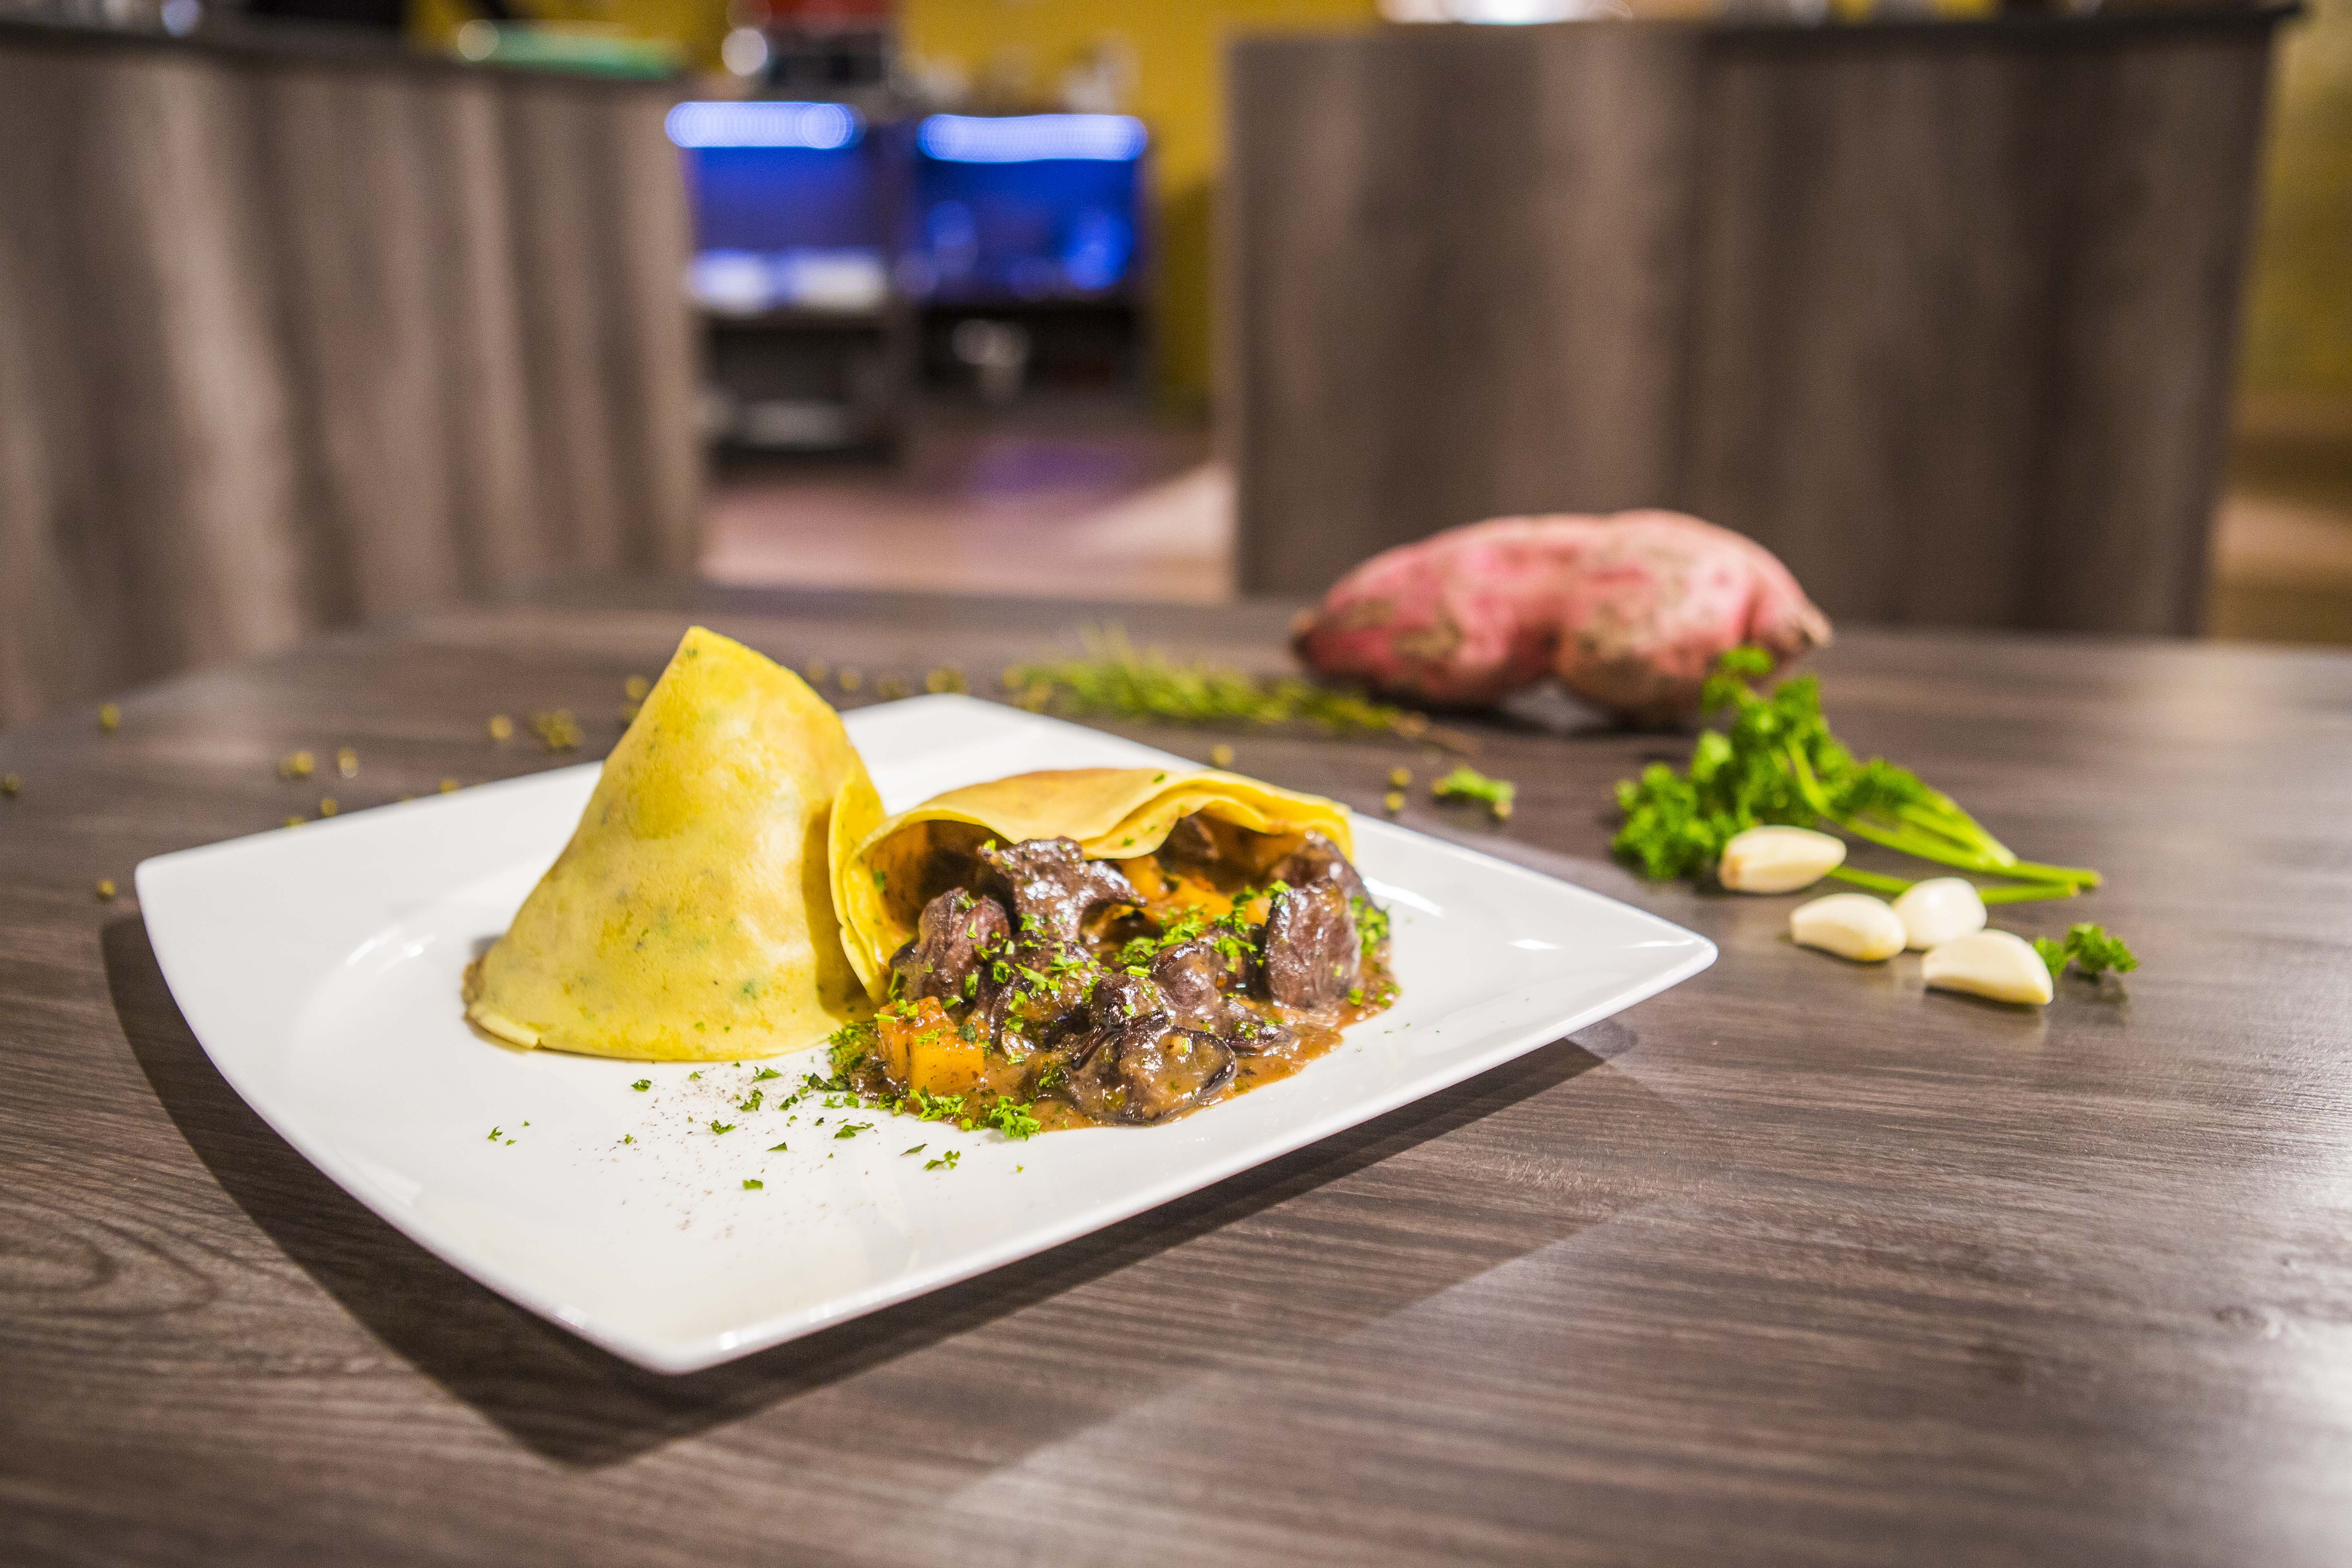 Rosemary Crepe with Liver